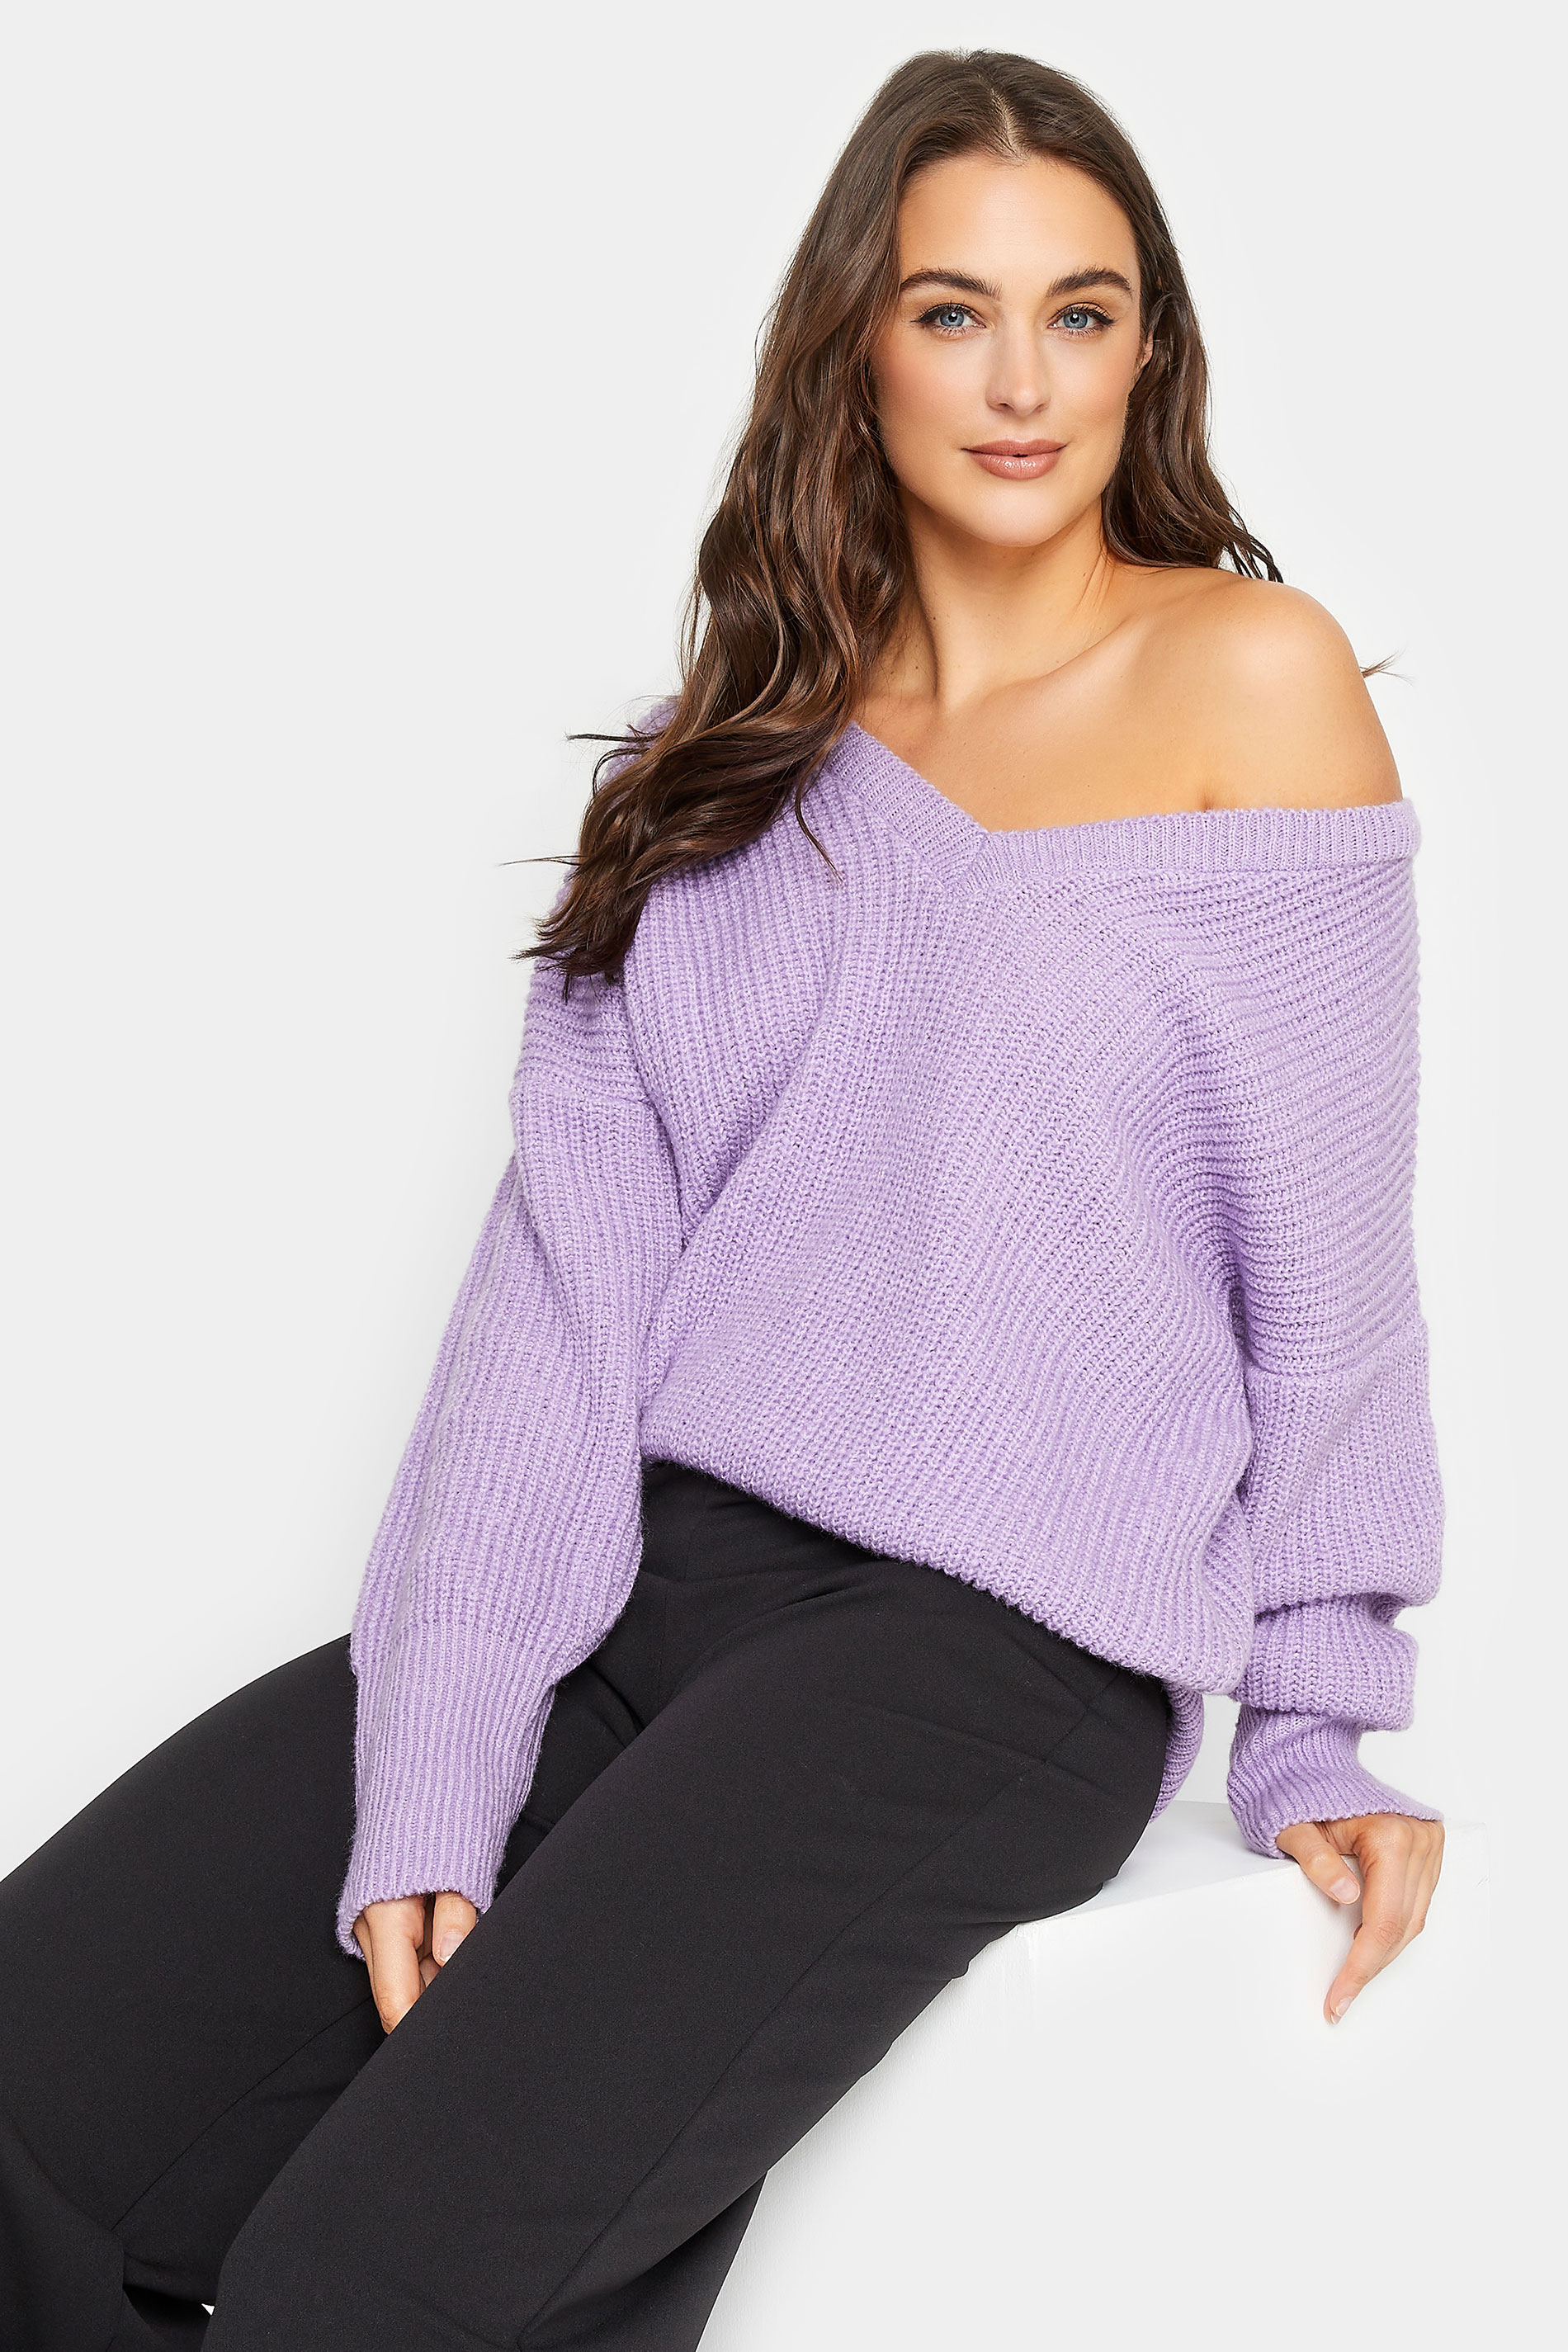 LTS Tall Women's Lilac Purple V-Neck Knitted Jumper | Long Tall Sally 1